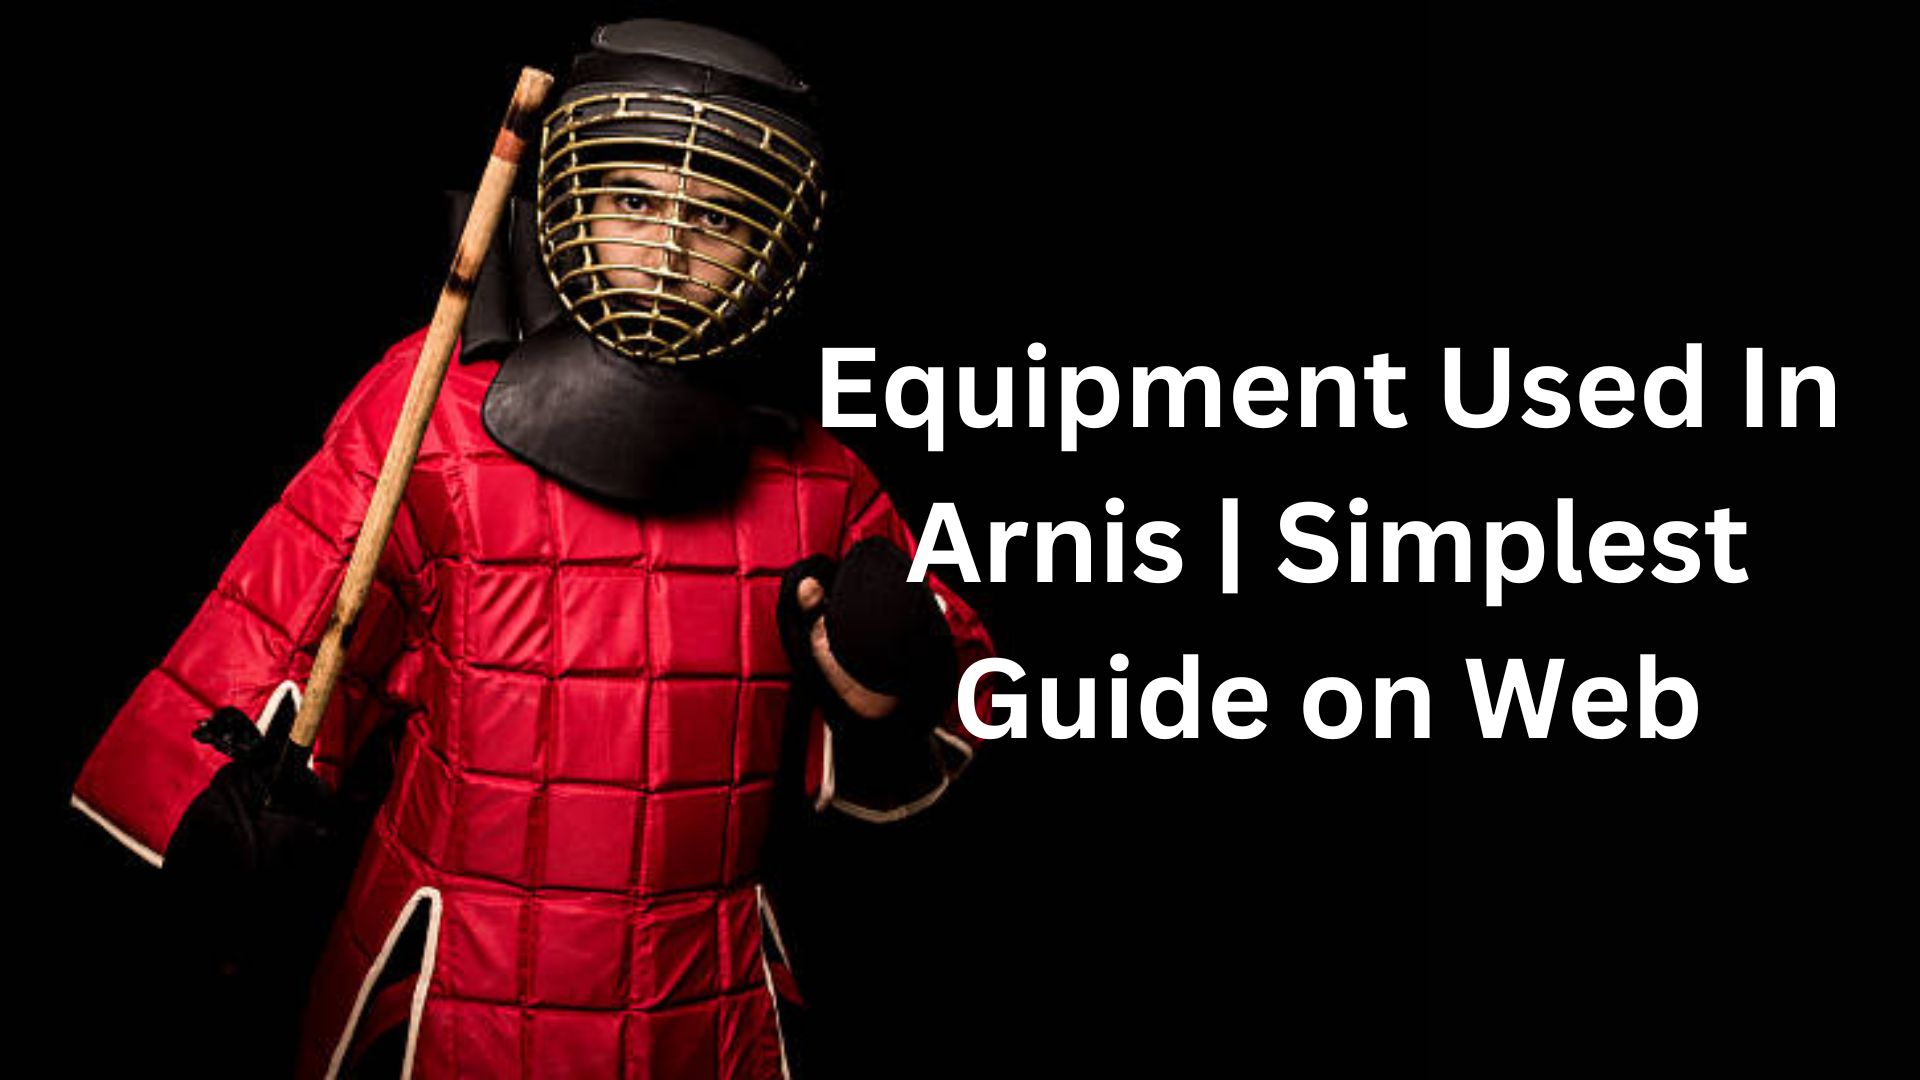 Equipment Used In Arnis